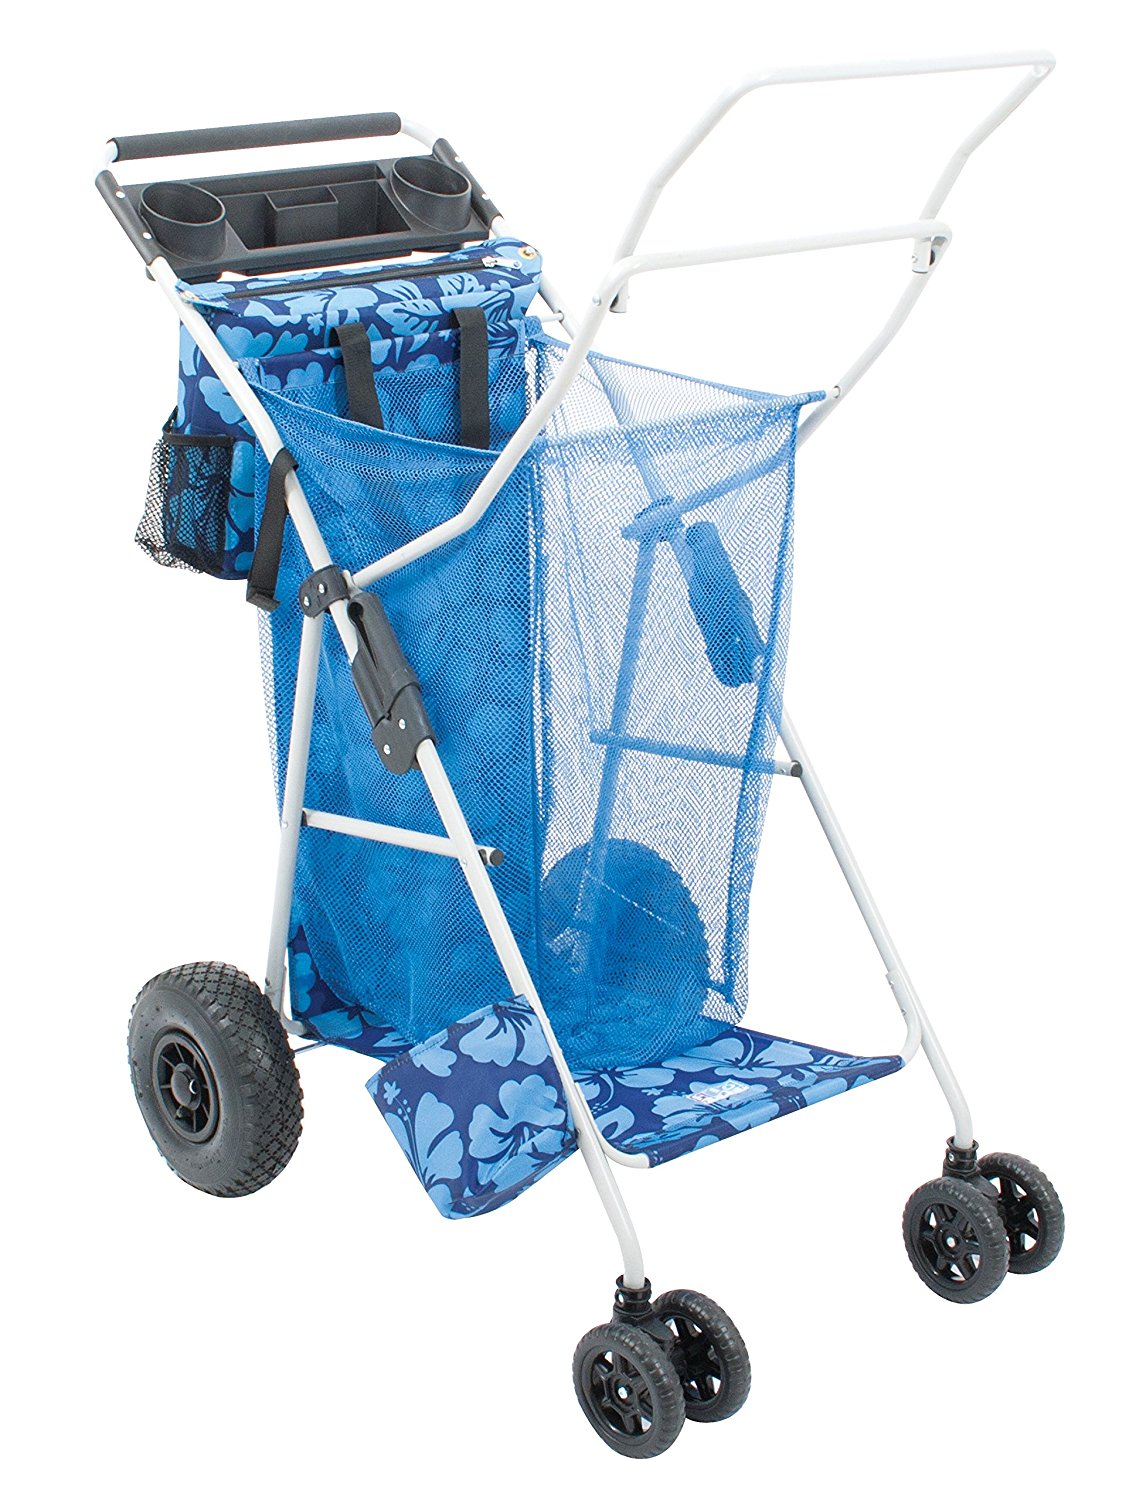 Top 10 Best Beach Carts In 2020 Make It Easier For You